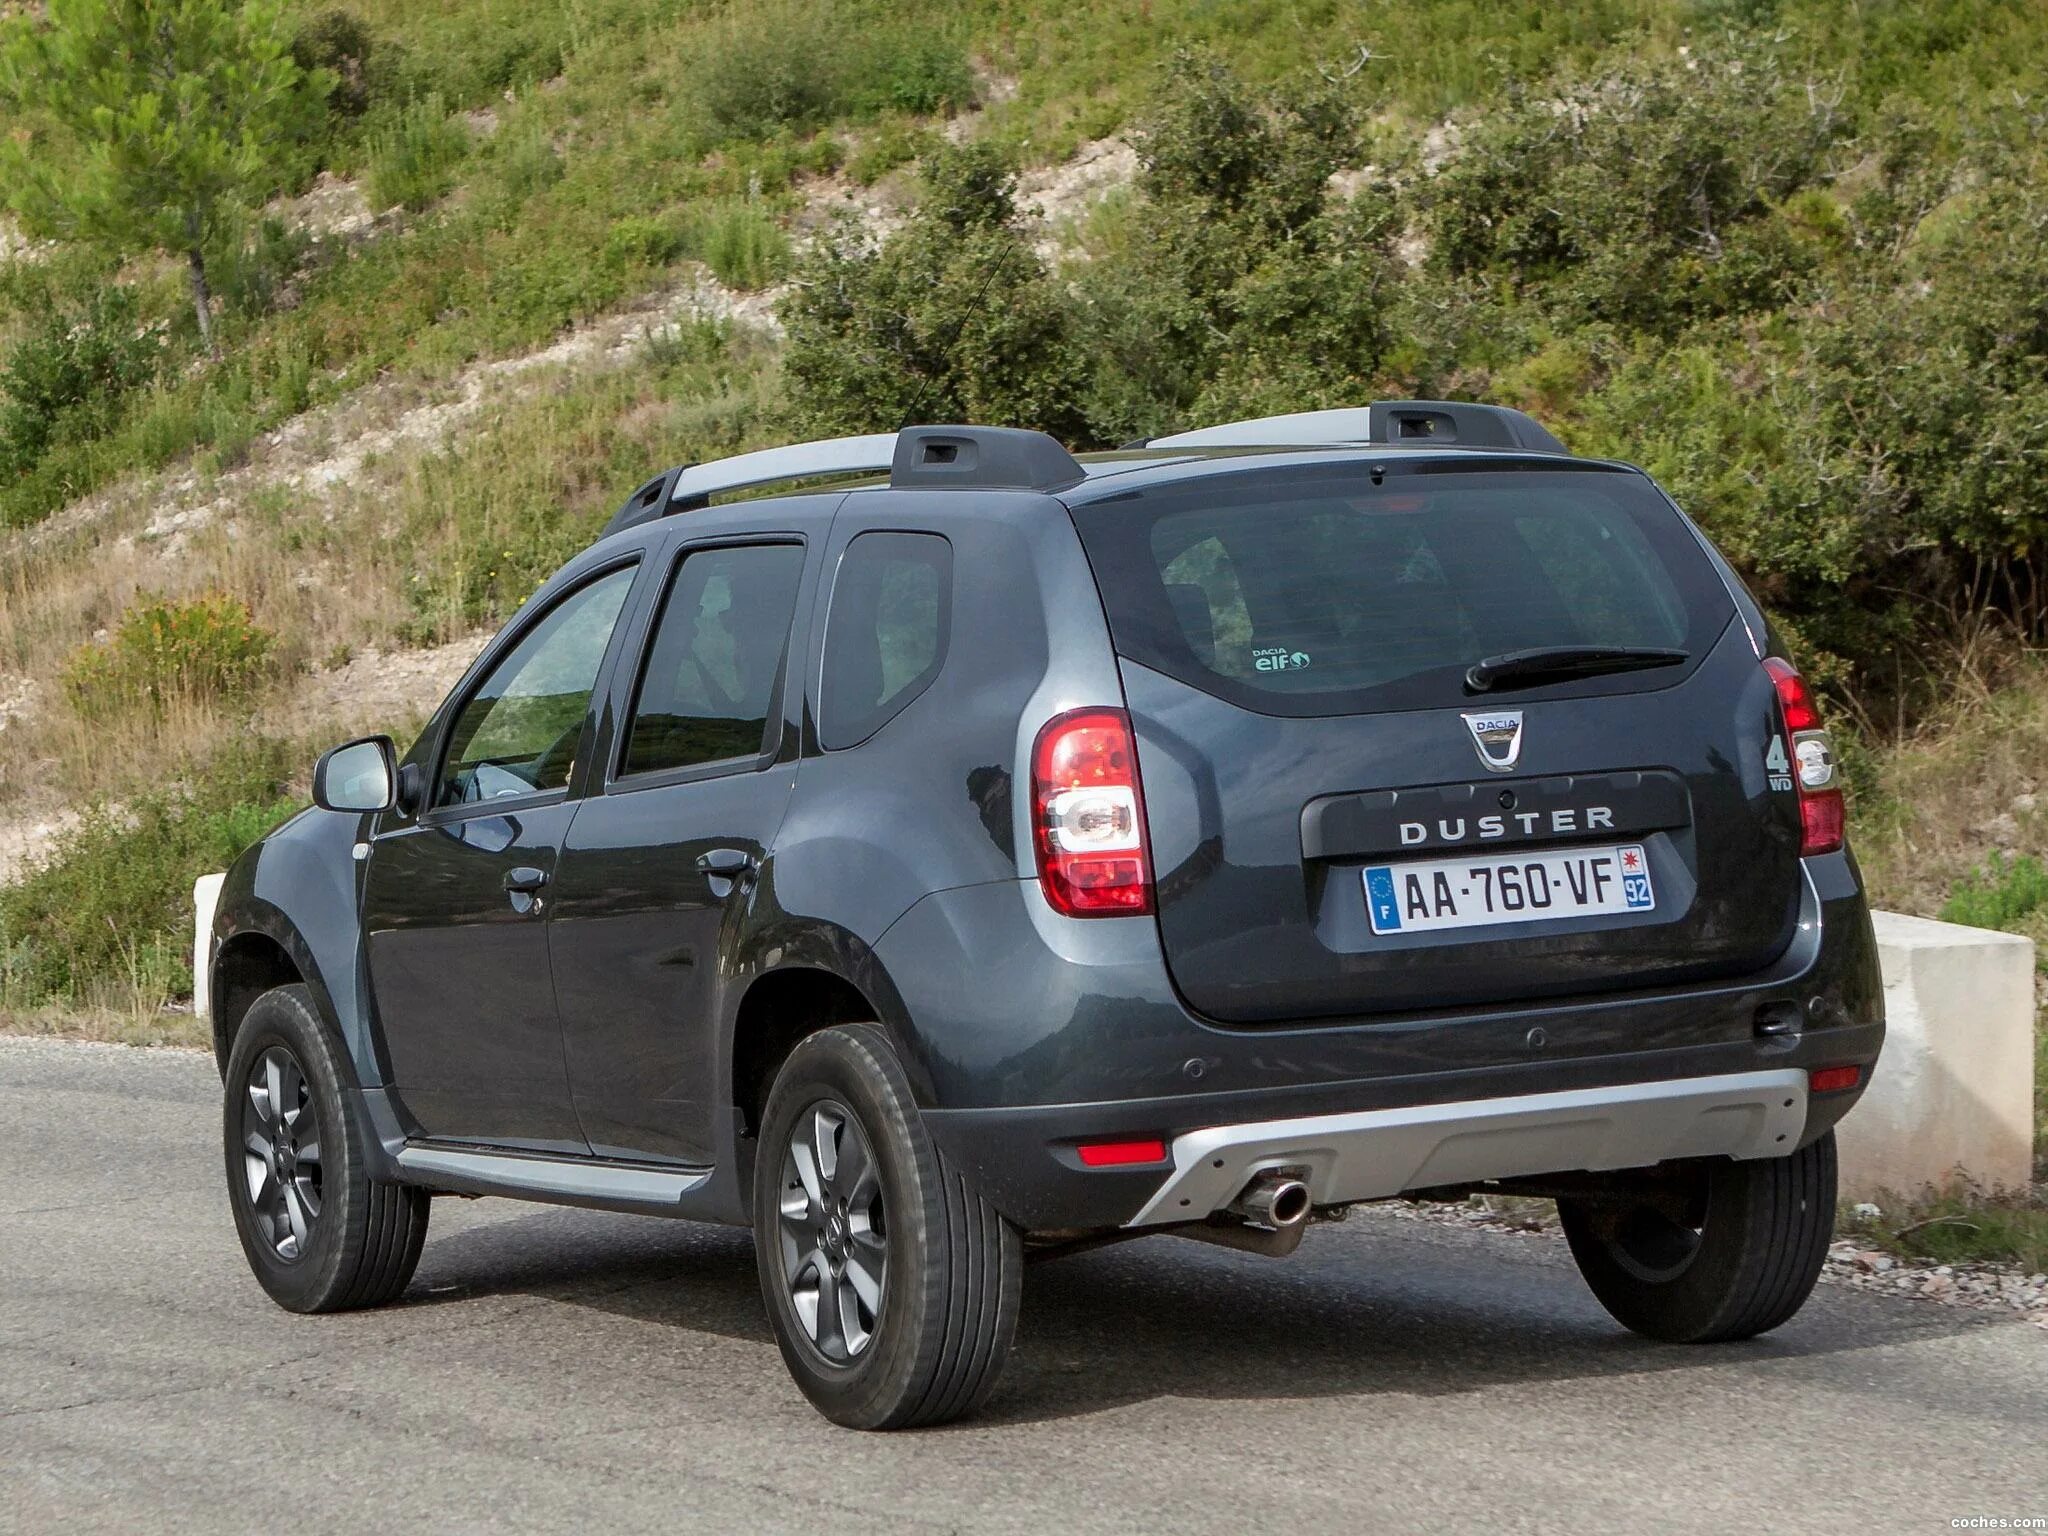 Renault duster 2014 год. Renault Duster 2013. Рено Дастер 2013. Dacia Duster 2013. Dacia Duster 2012.